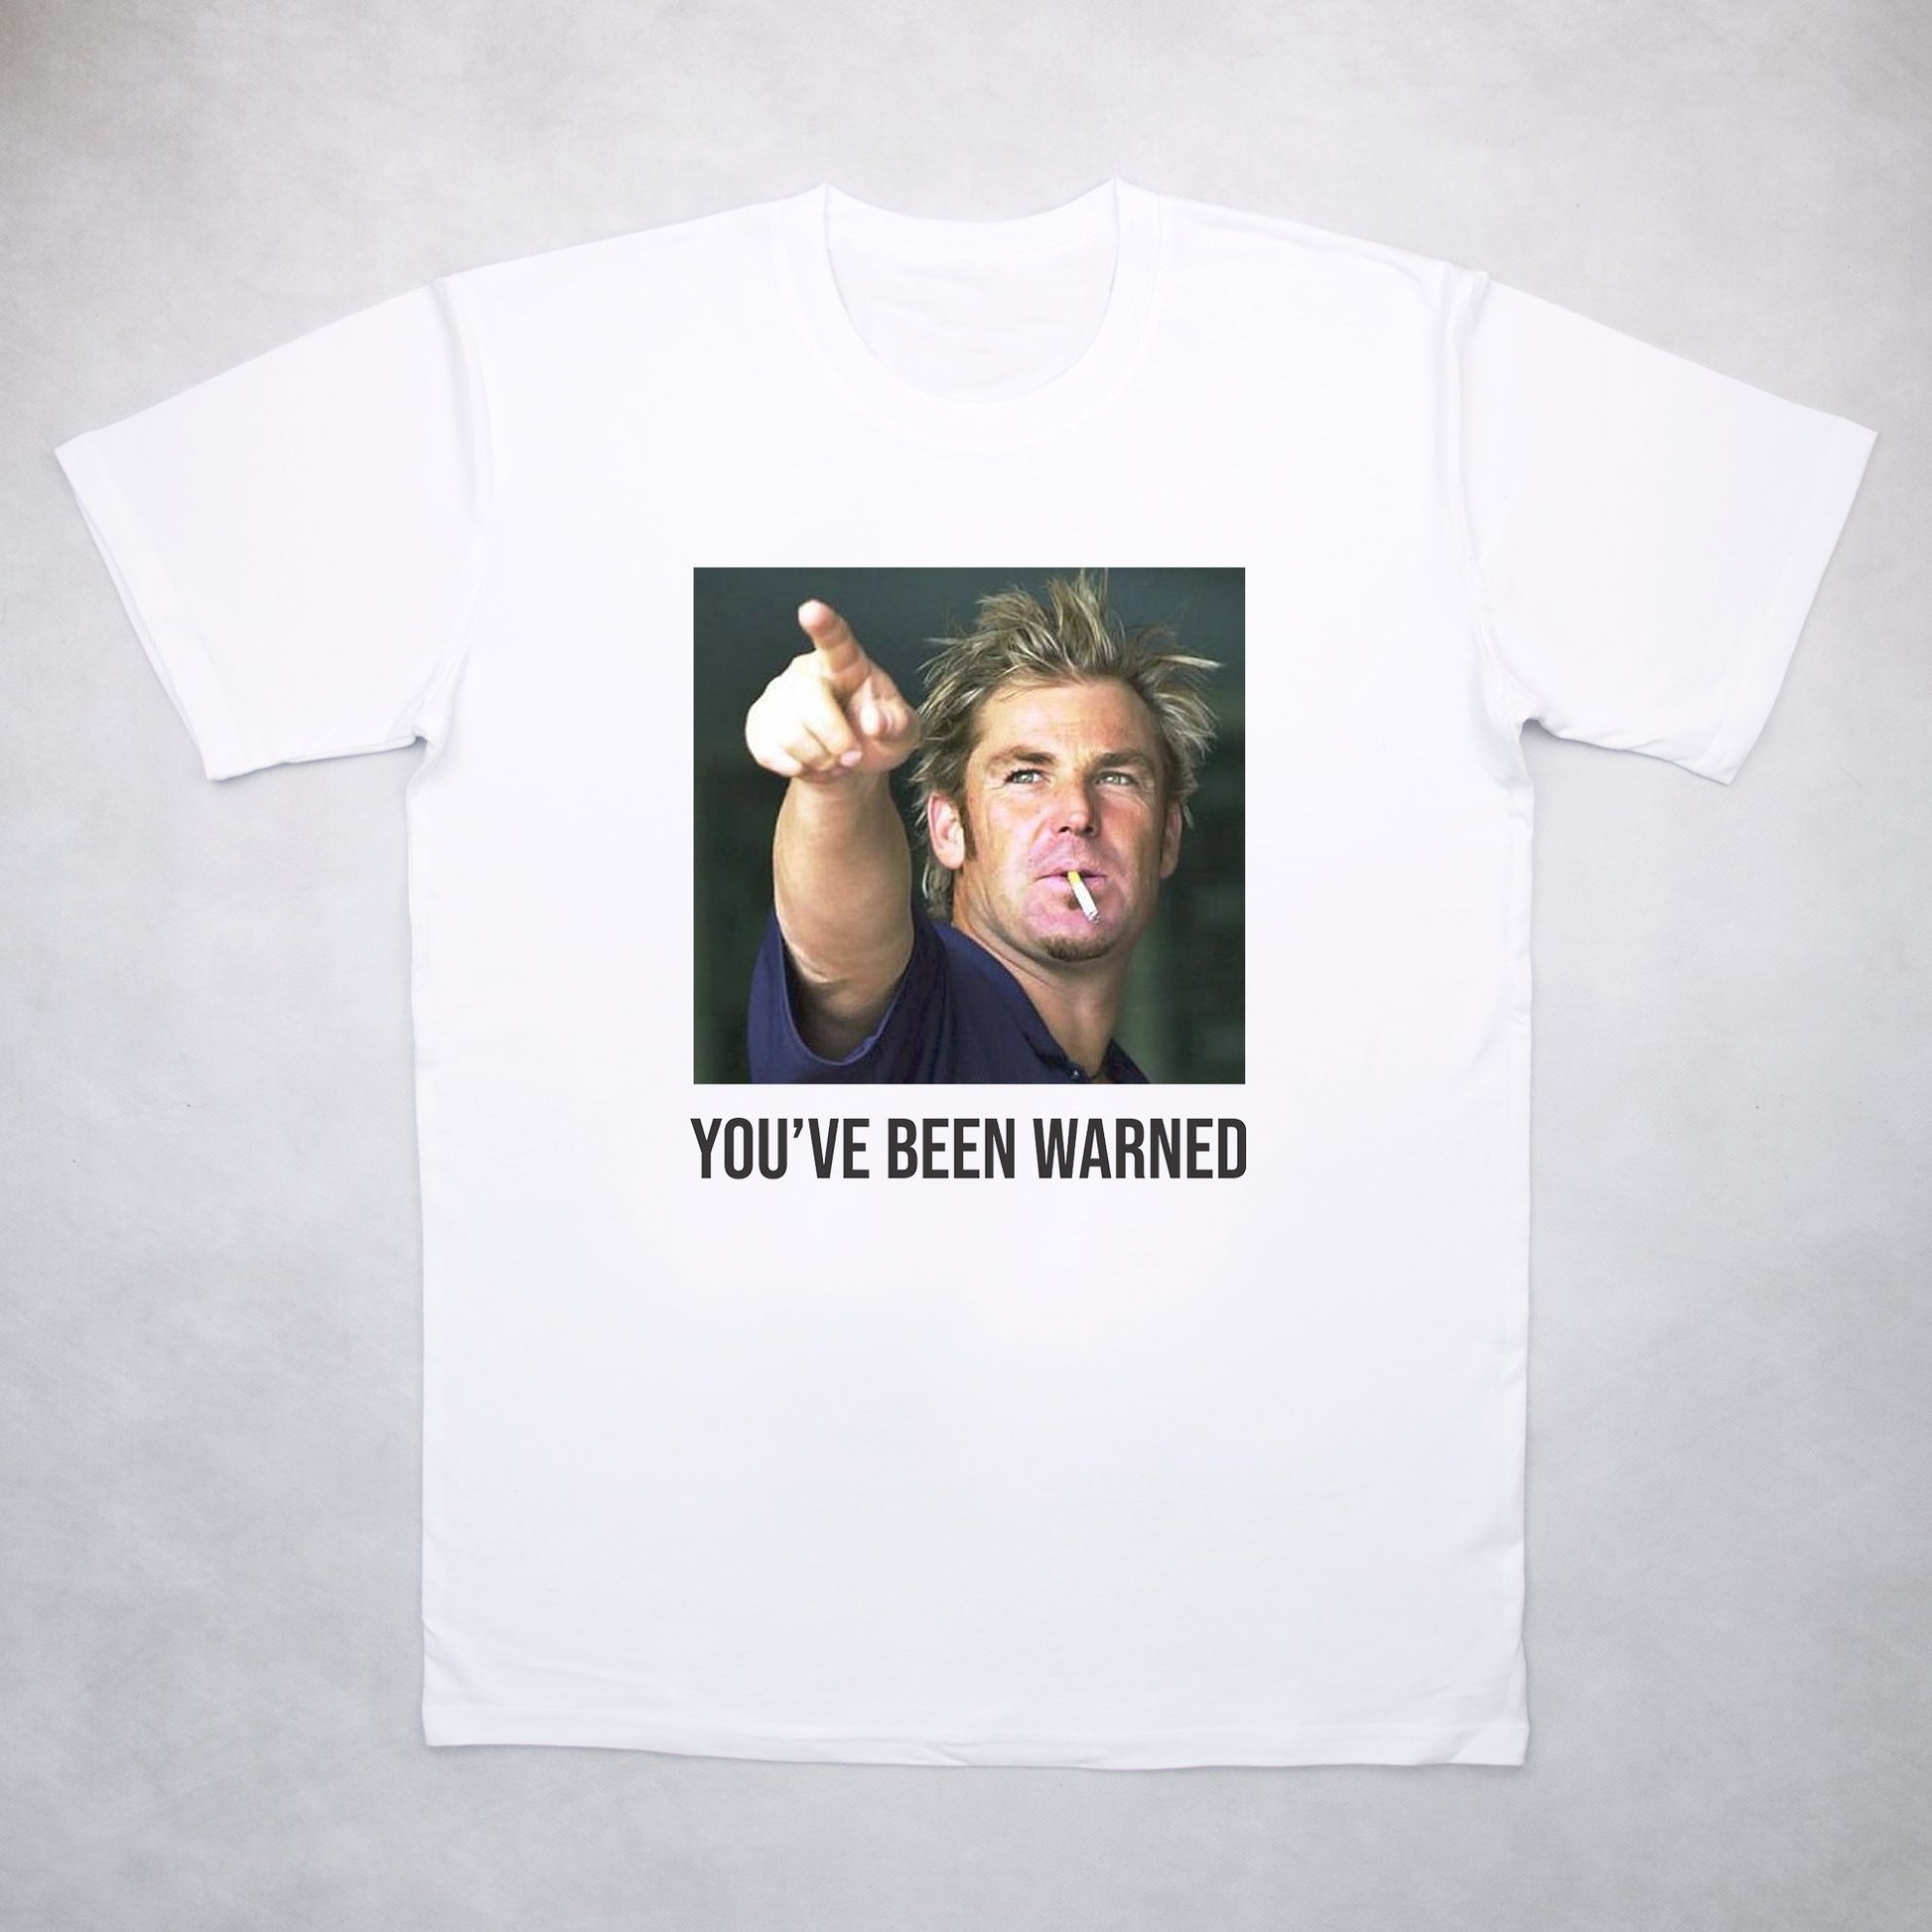 Classy Duds Short Sleeve T-Shirts You've Been Warned Tee